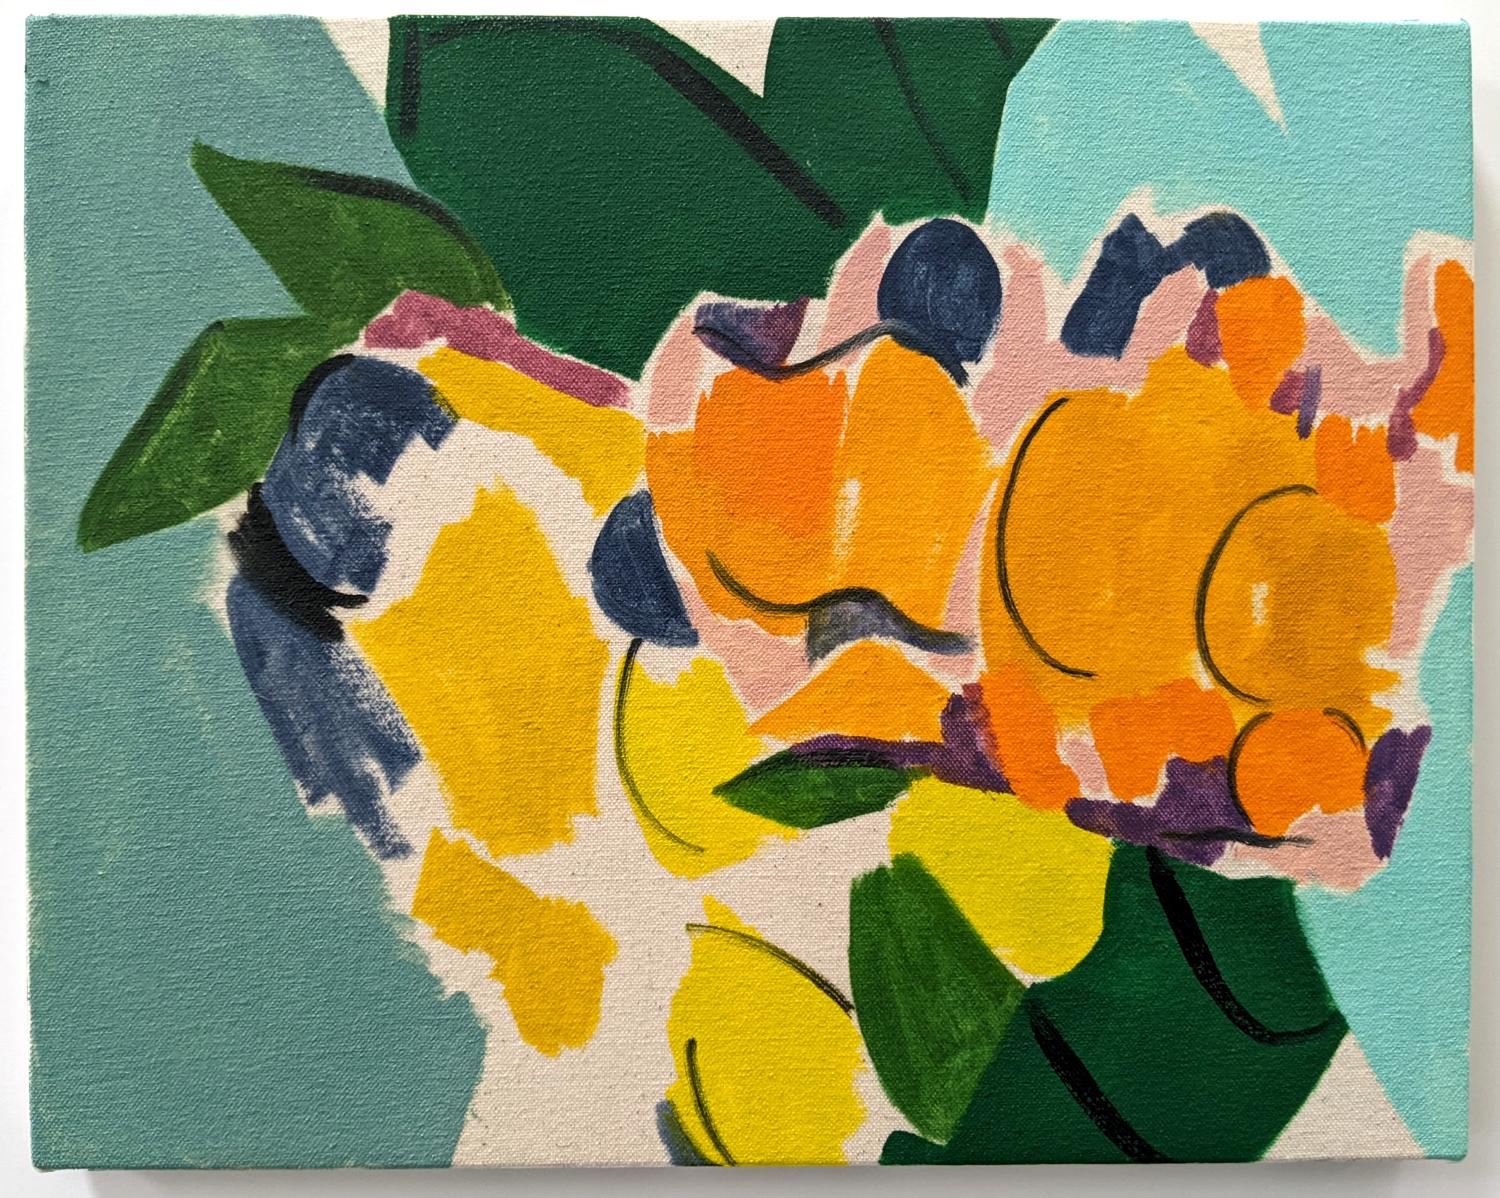 Citrus With Drapery - colourful, abstracted still life, oil on canvas over panel - Painting by Mel Davis